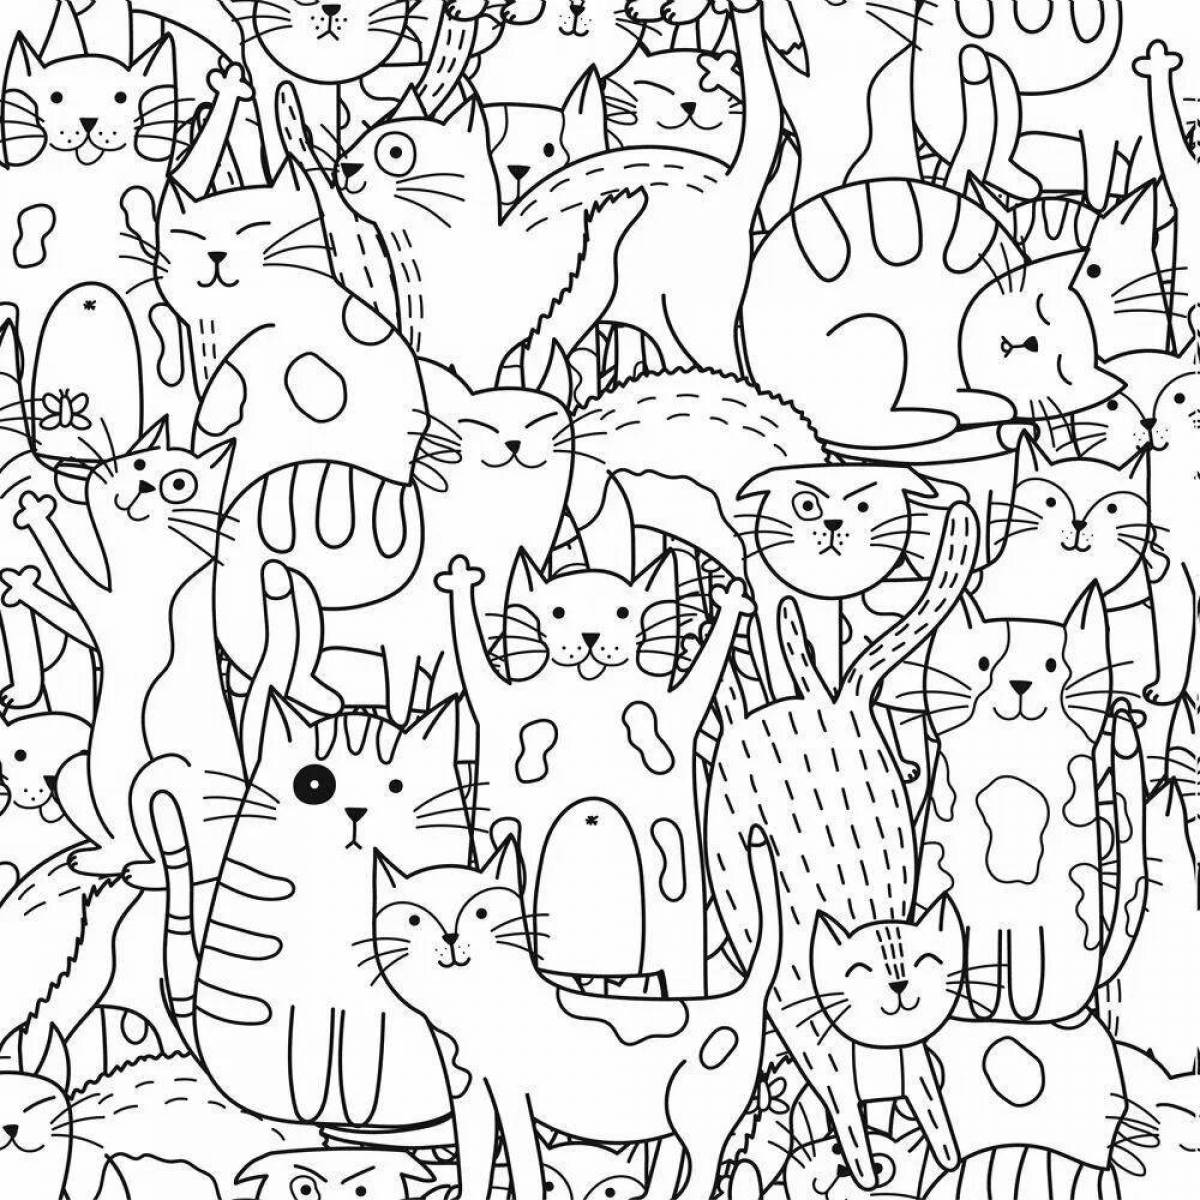 Exotic cats coloring book